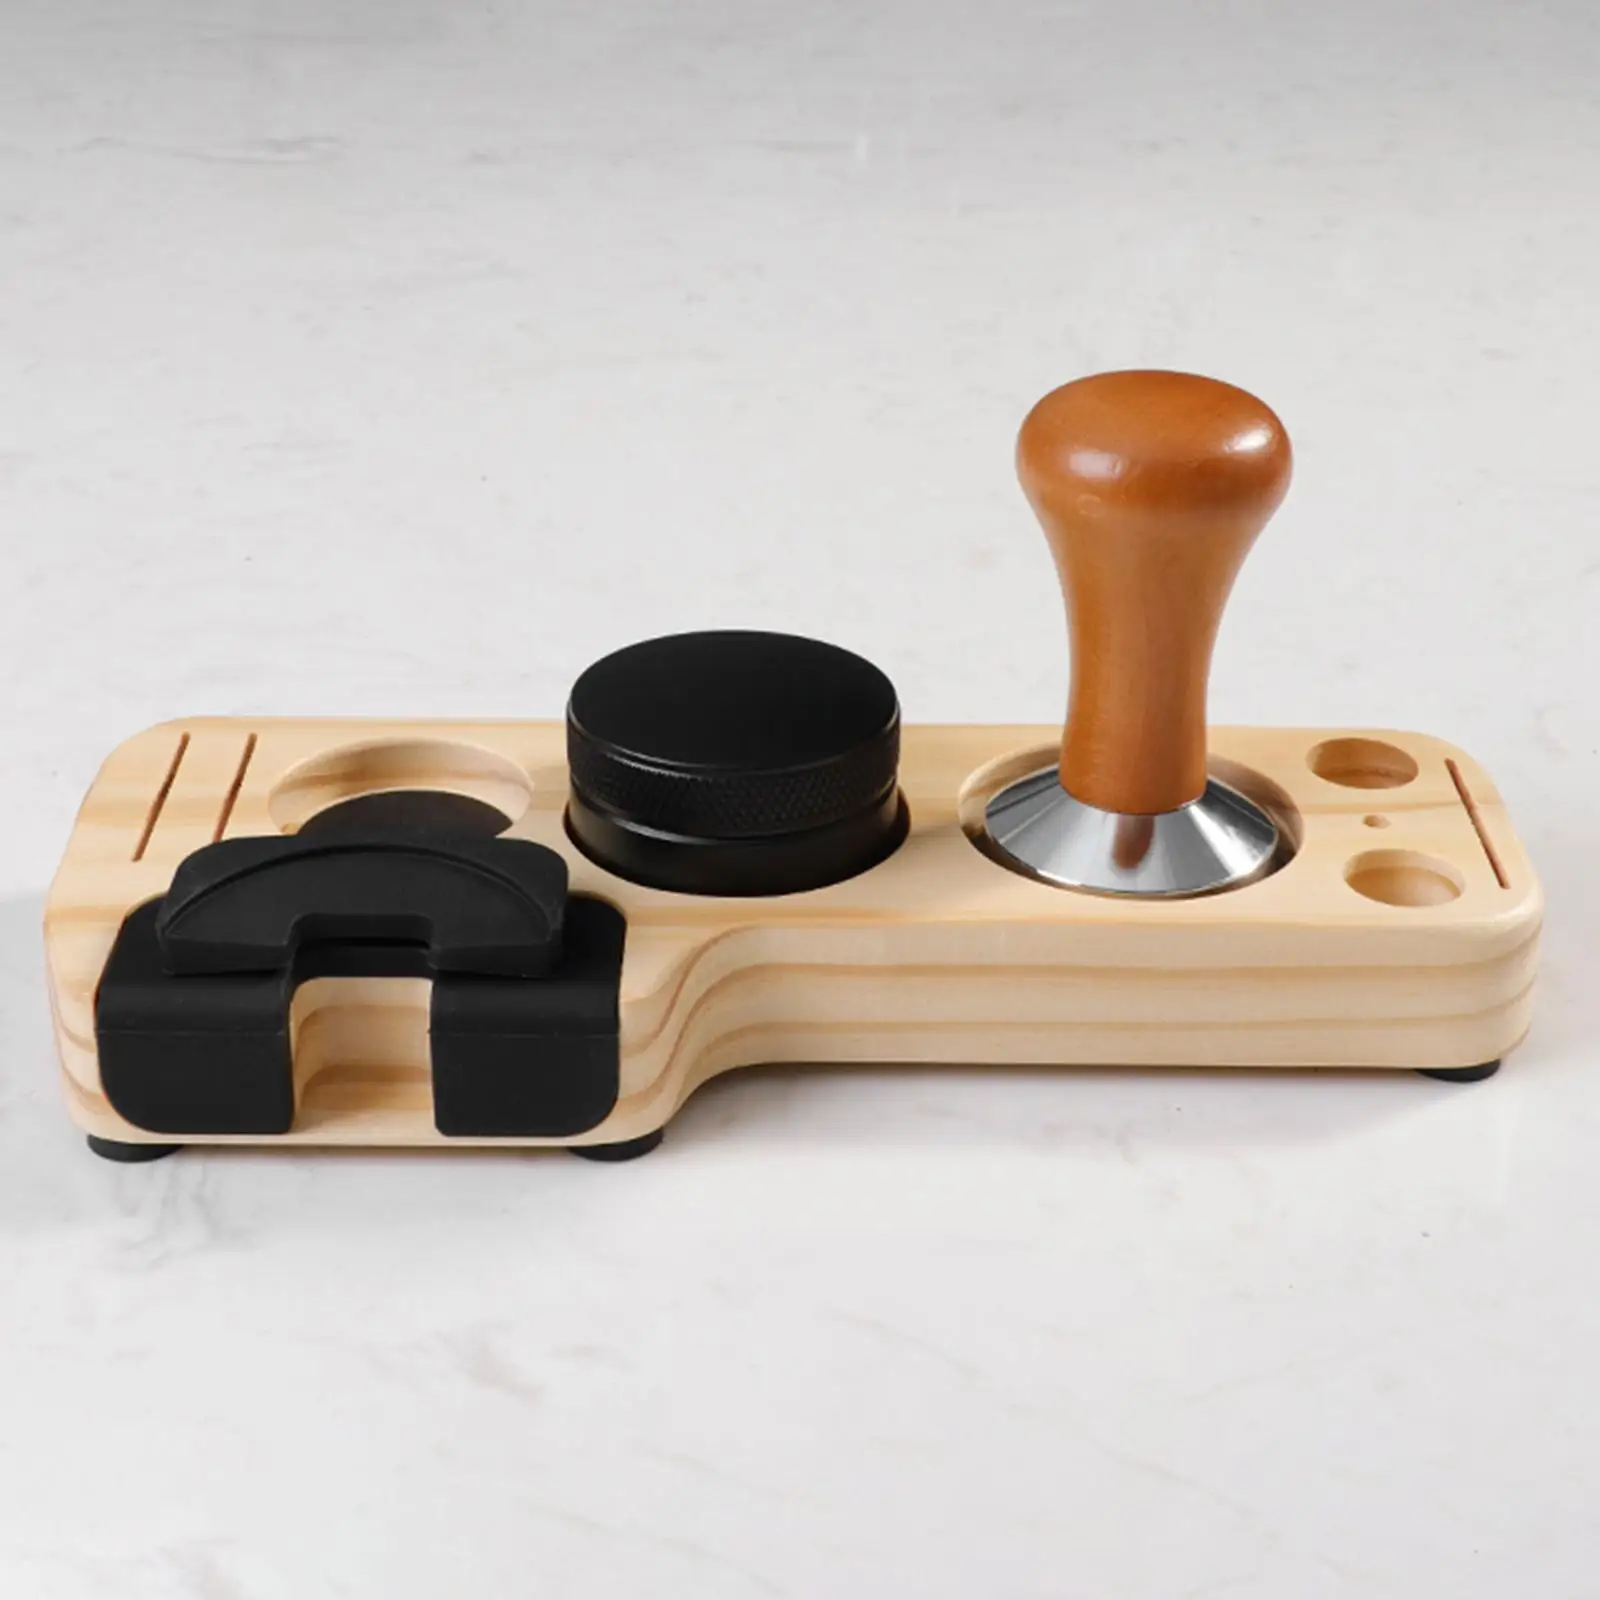 Wood Coffee Filter Tamper Holder Kits Non Slip for Counters Tearoom Kitchens